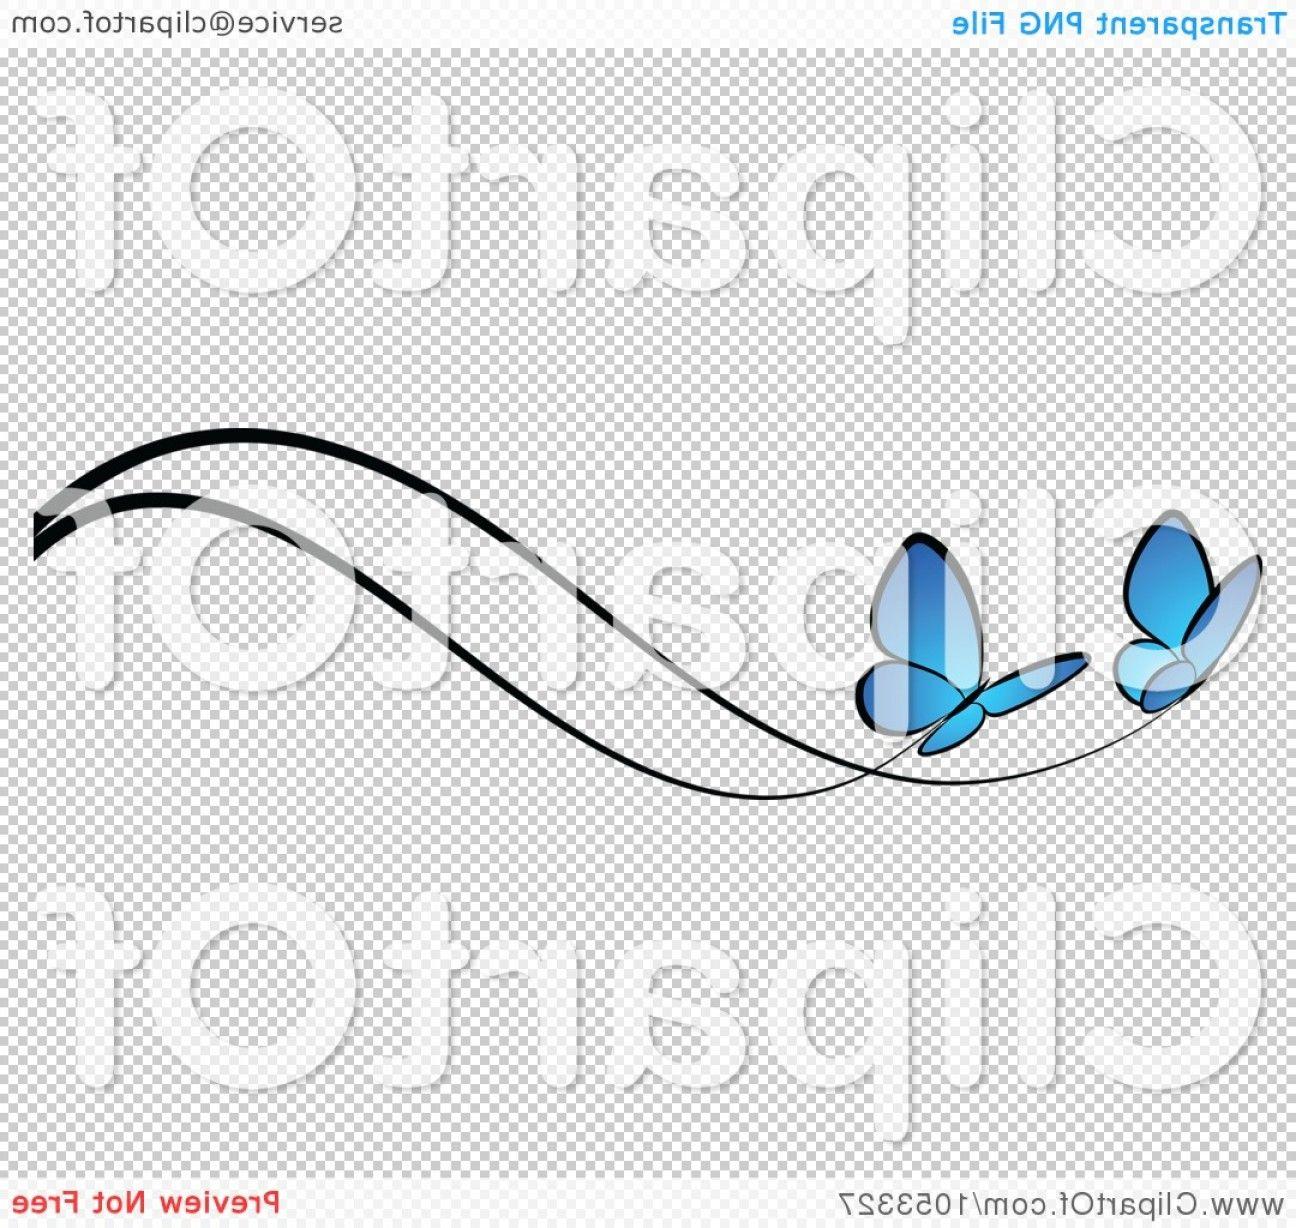 Two Blue Lines Logo - Border Of Two Blue Butterflies And Black Lines